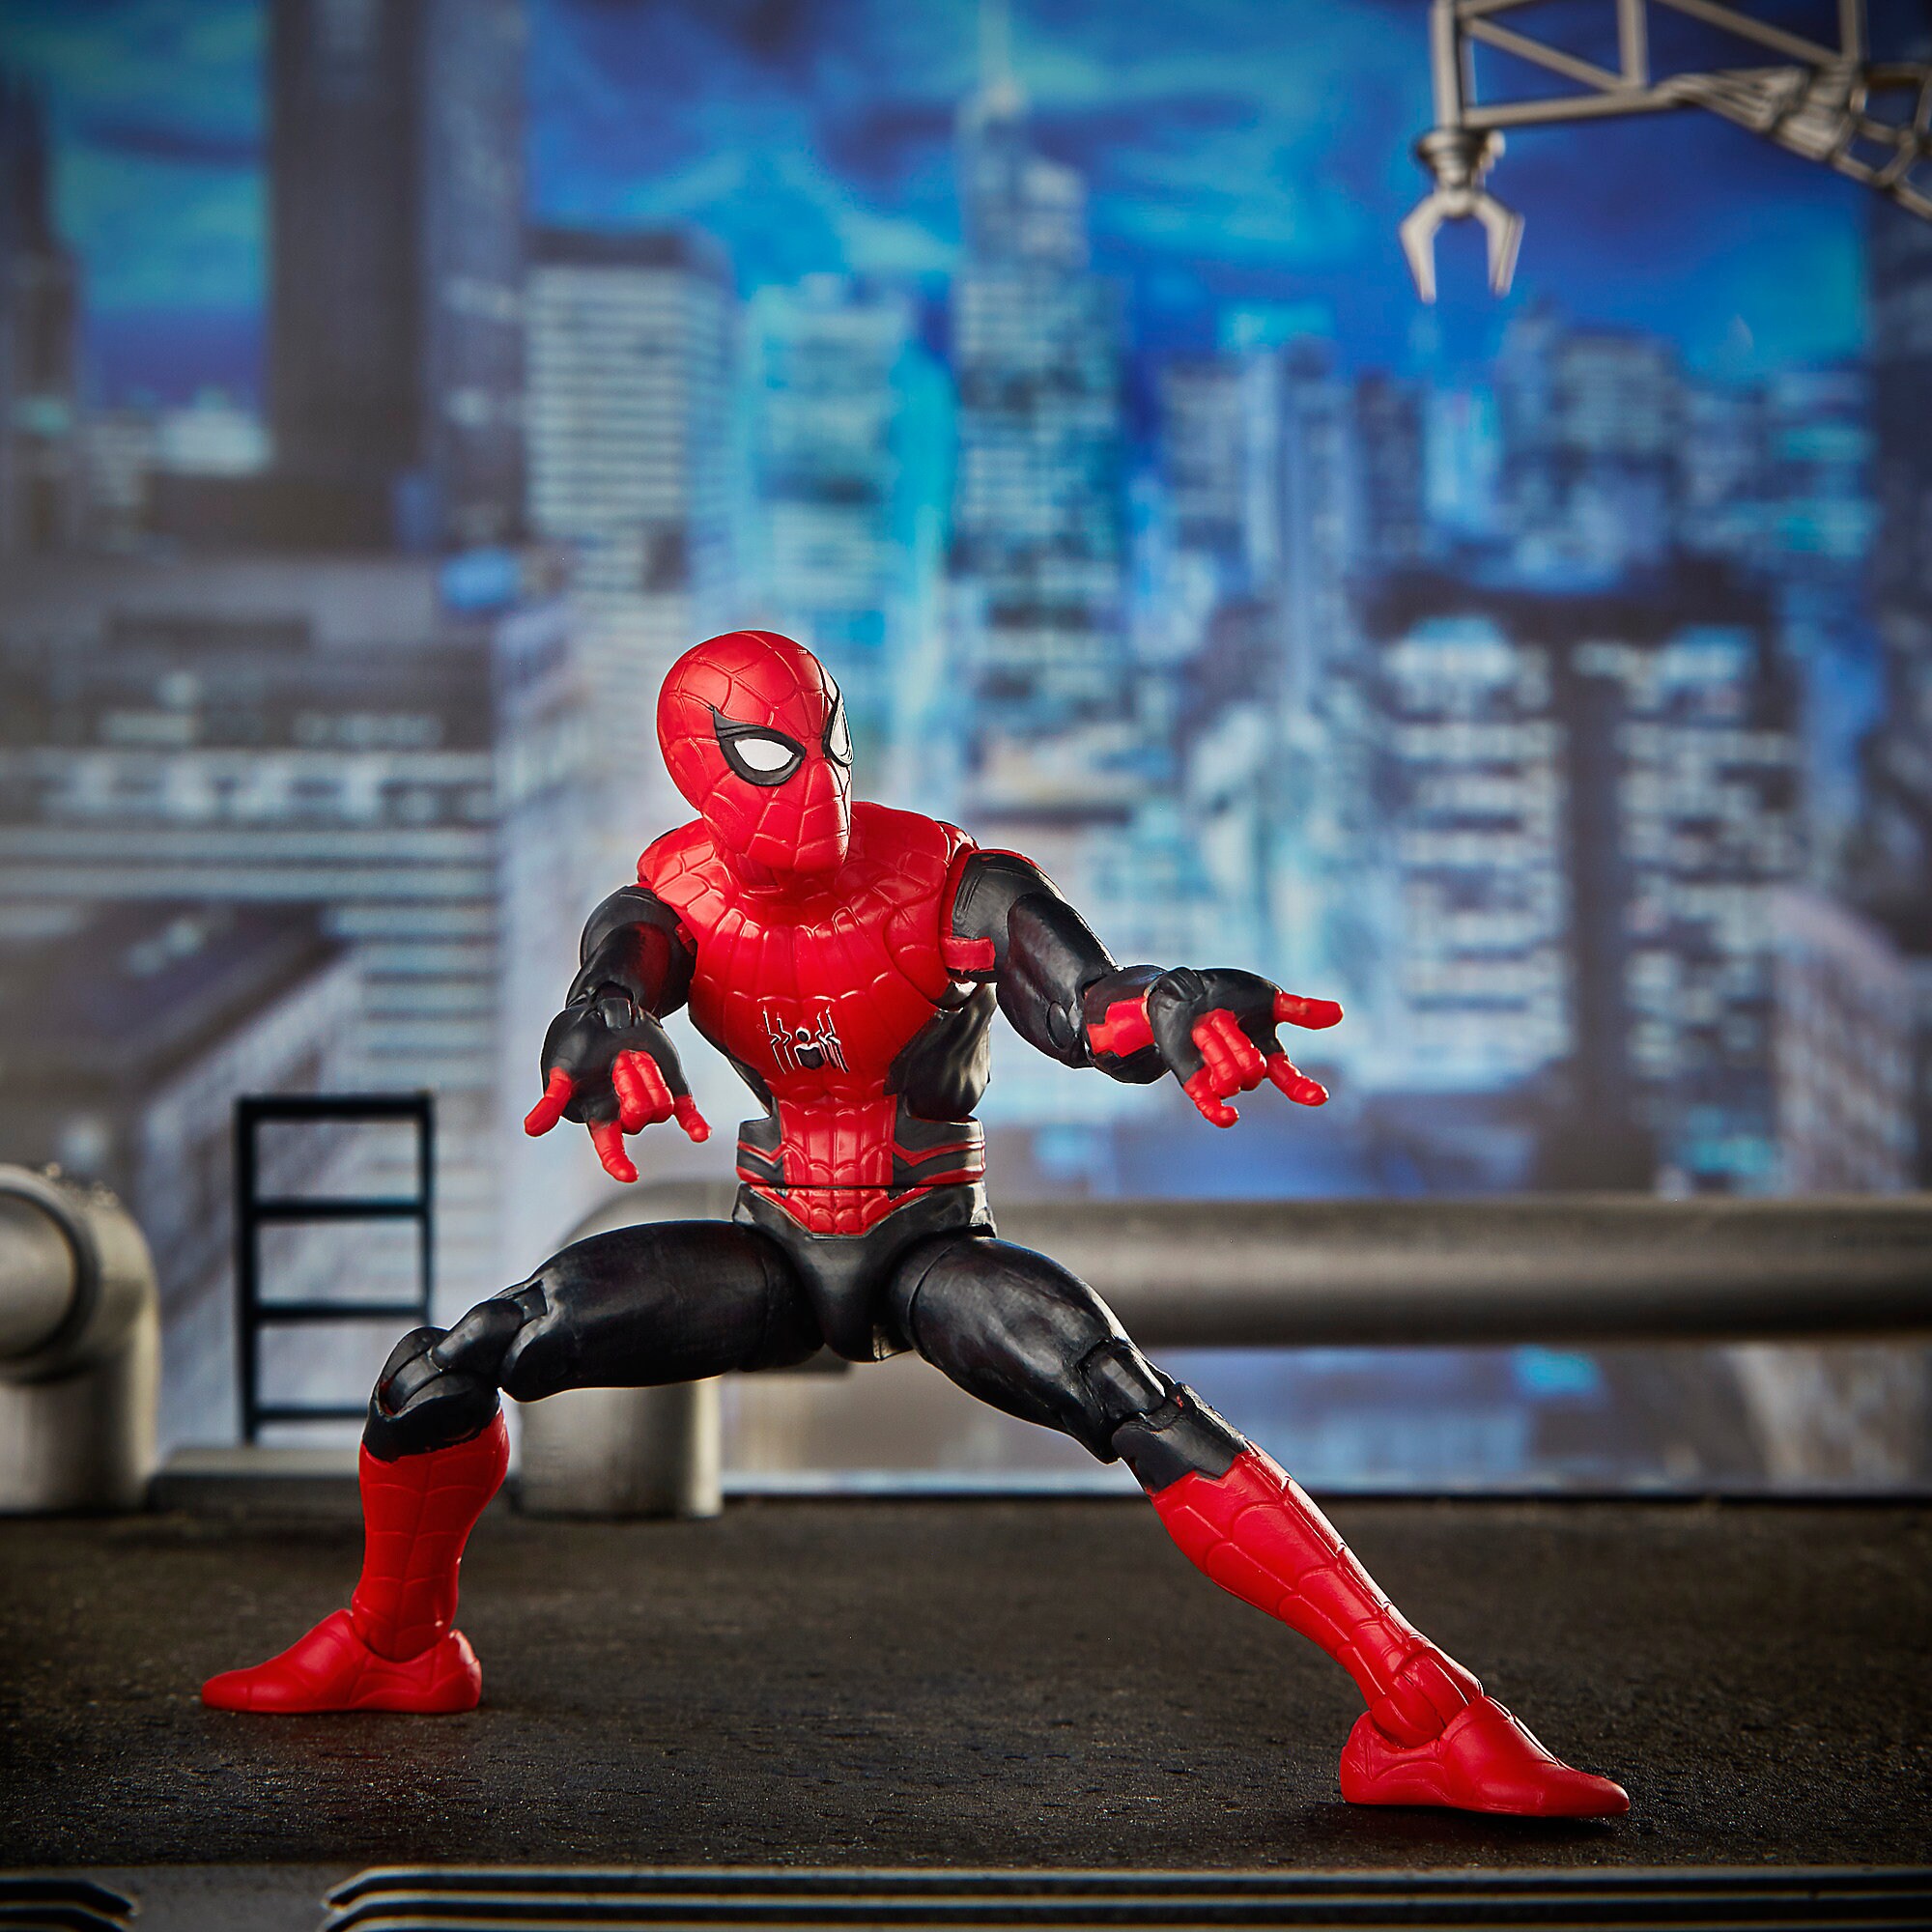 Spider-Man Action Figure - Spider-Man: Far from Home Legends Series